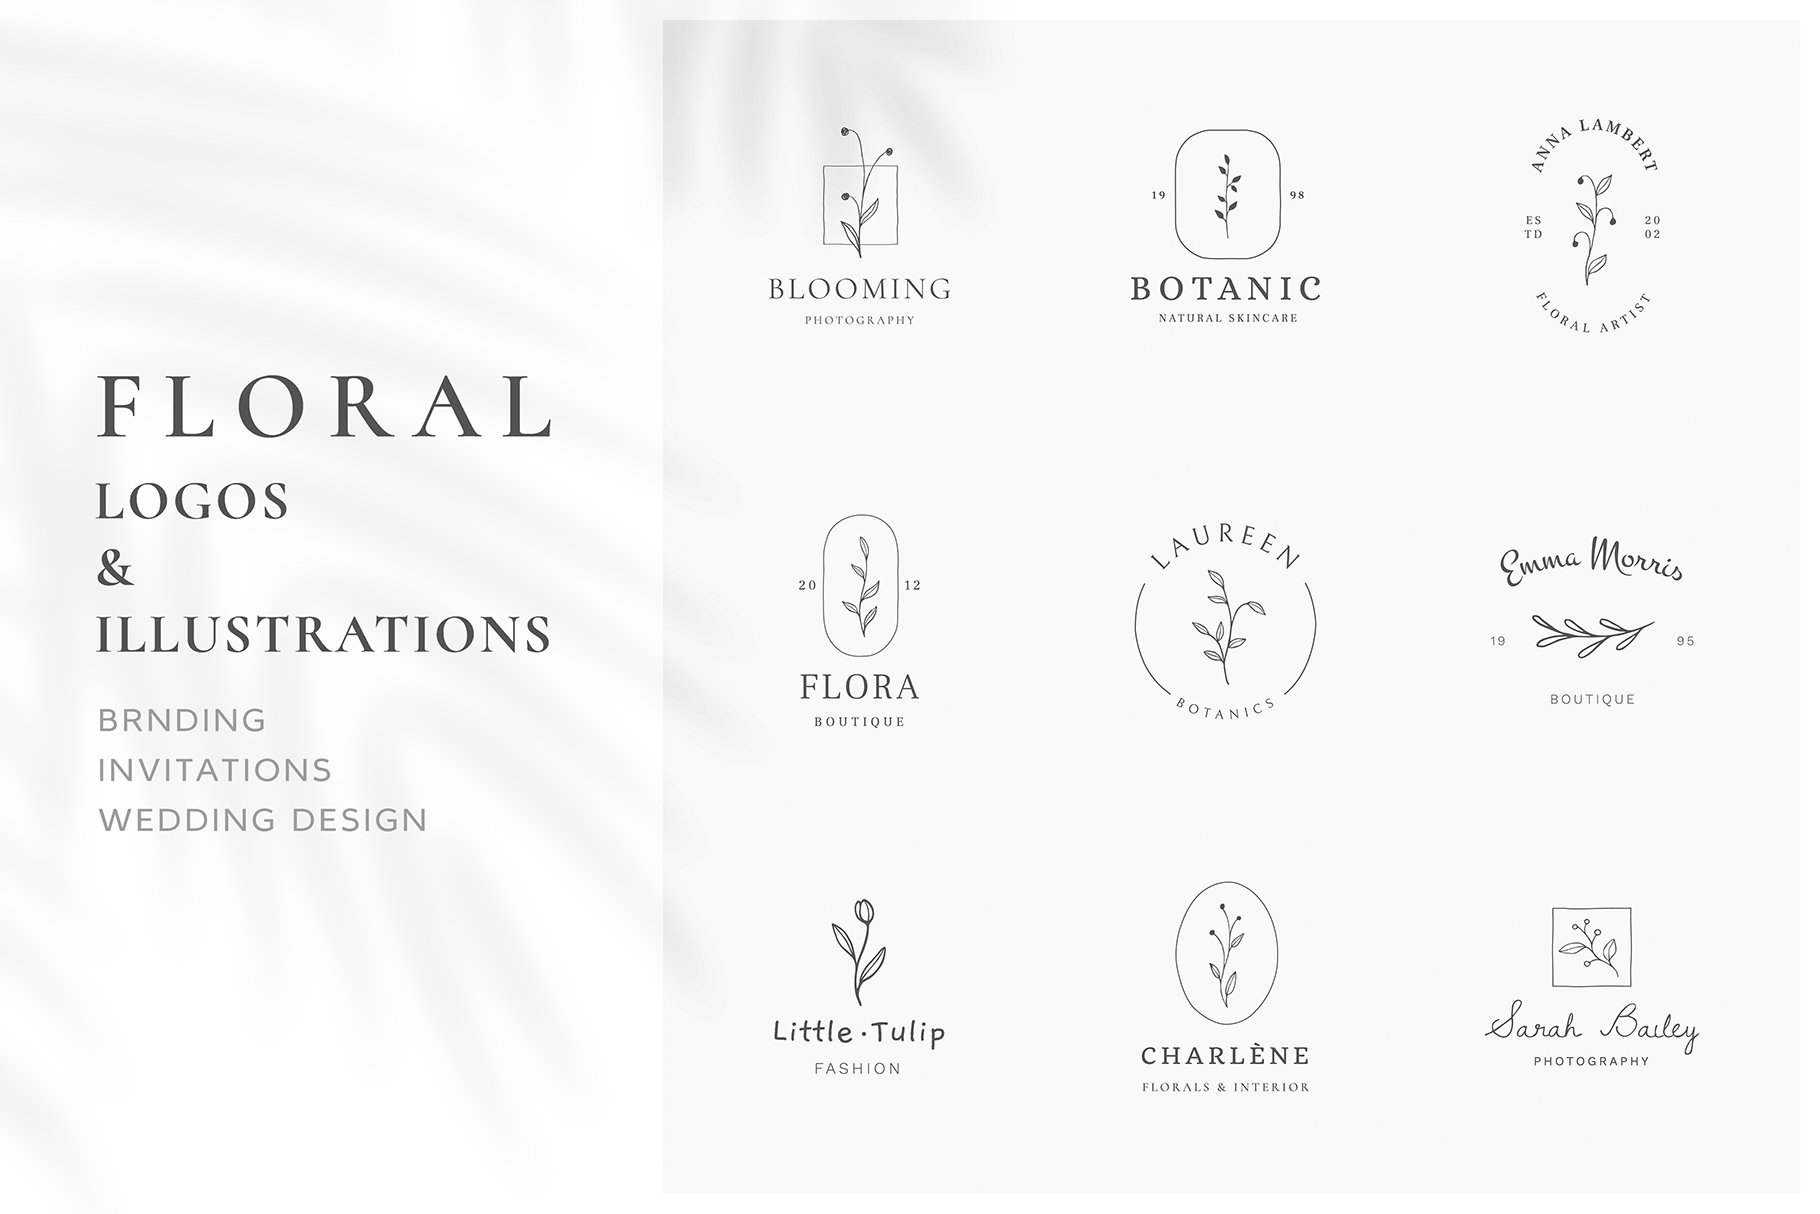 Floral Logos & Illustrations cover image.